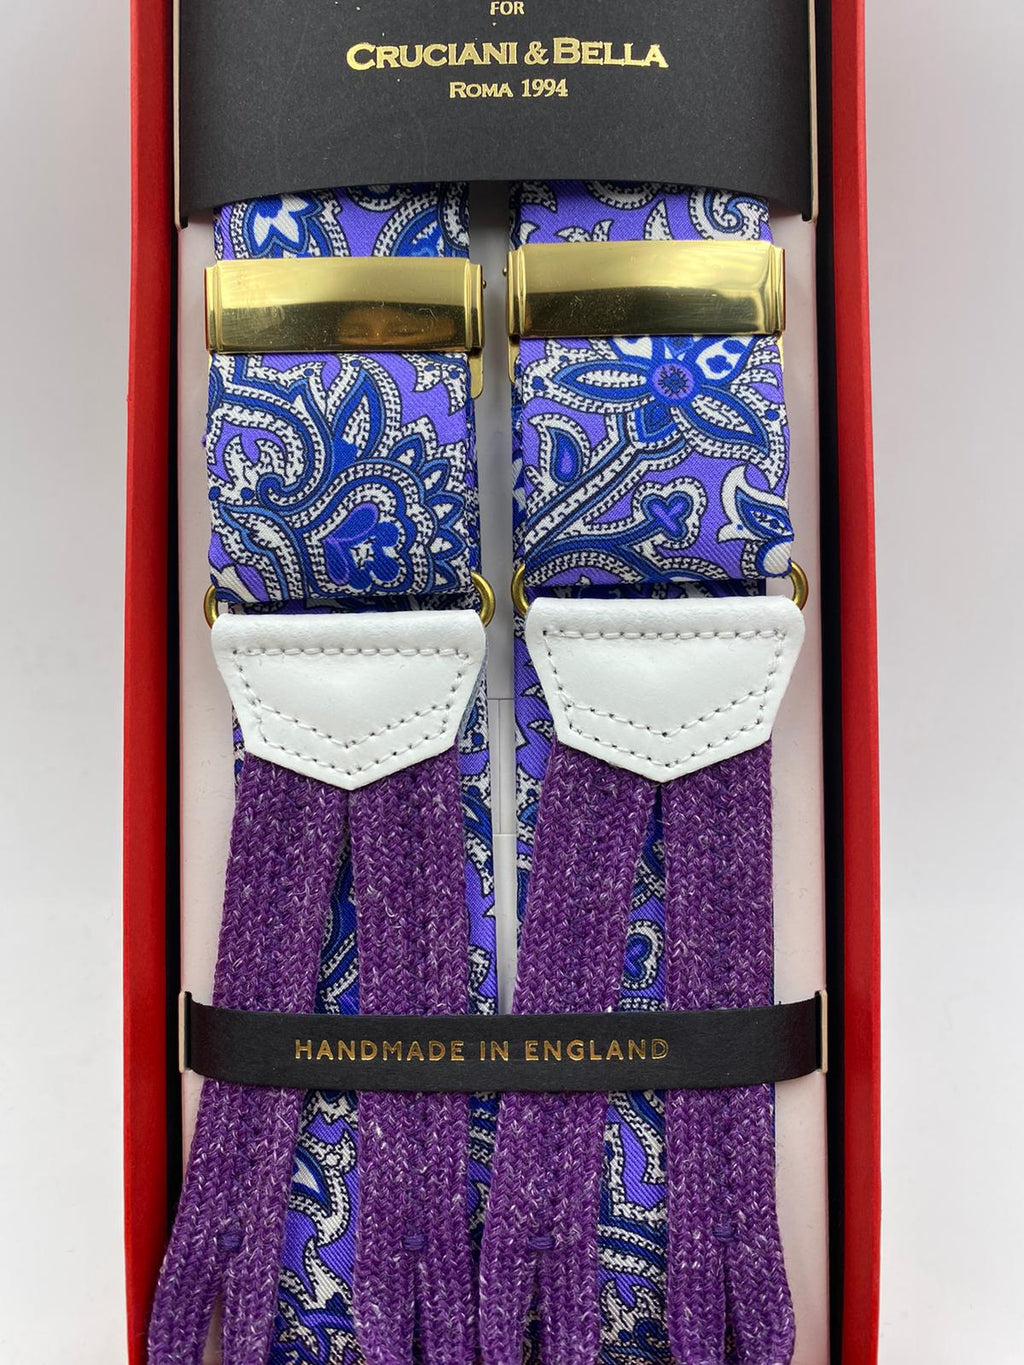 Albert Thurston for Cruciani & Bella Made in England Adjustable Sizing 40 mm braces Keyte Silk   Purple Blue and White Flower Motif Braid ends Y-Shaped Nickel Fitting 3704 XL